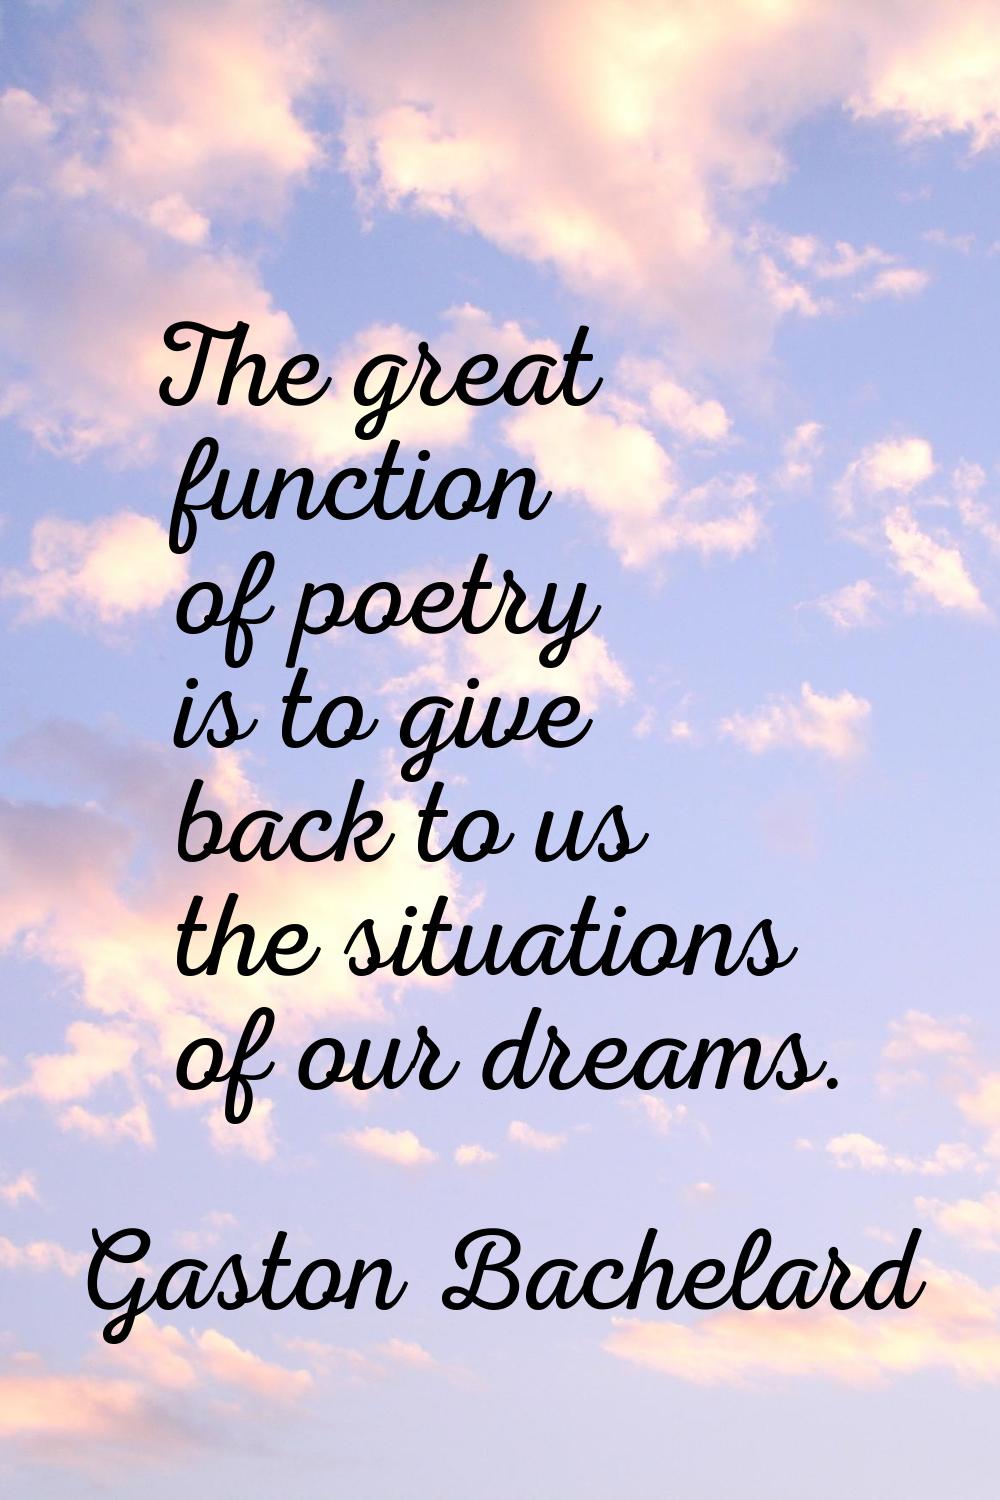 The great function of poetry is to give back to us the situations of our dreams.